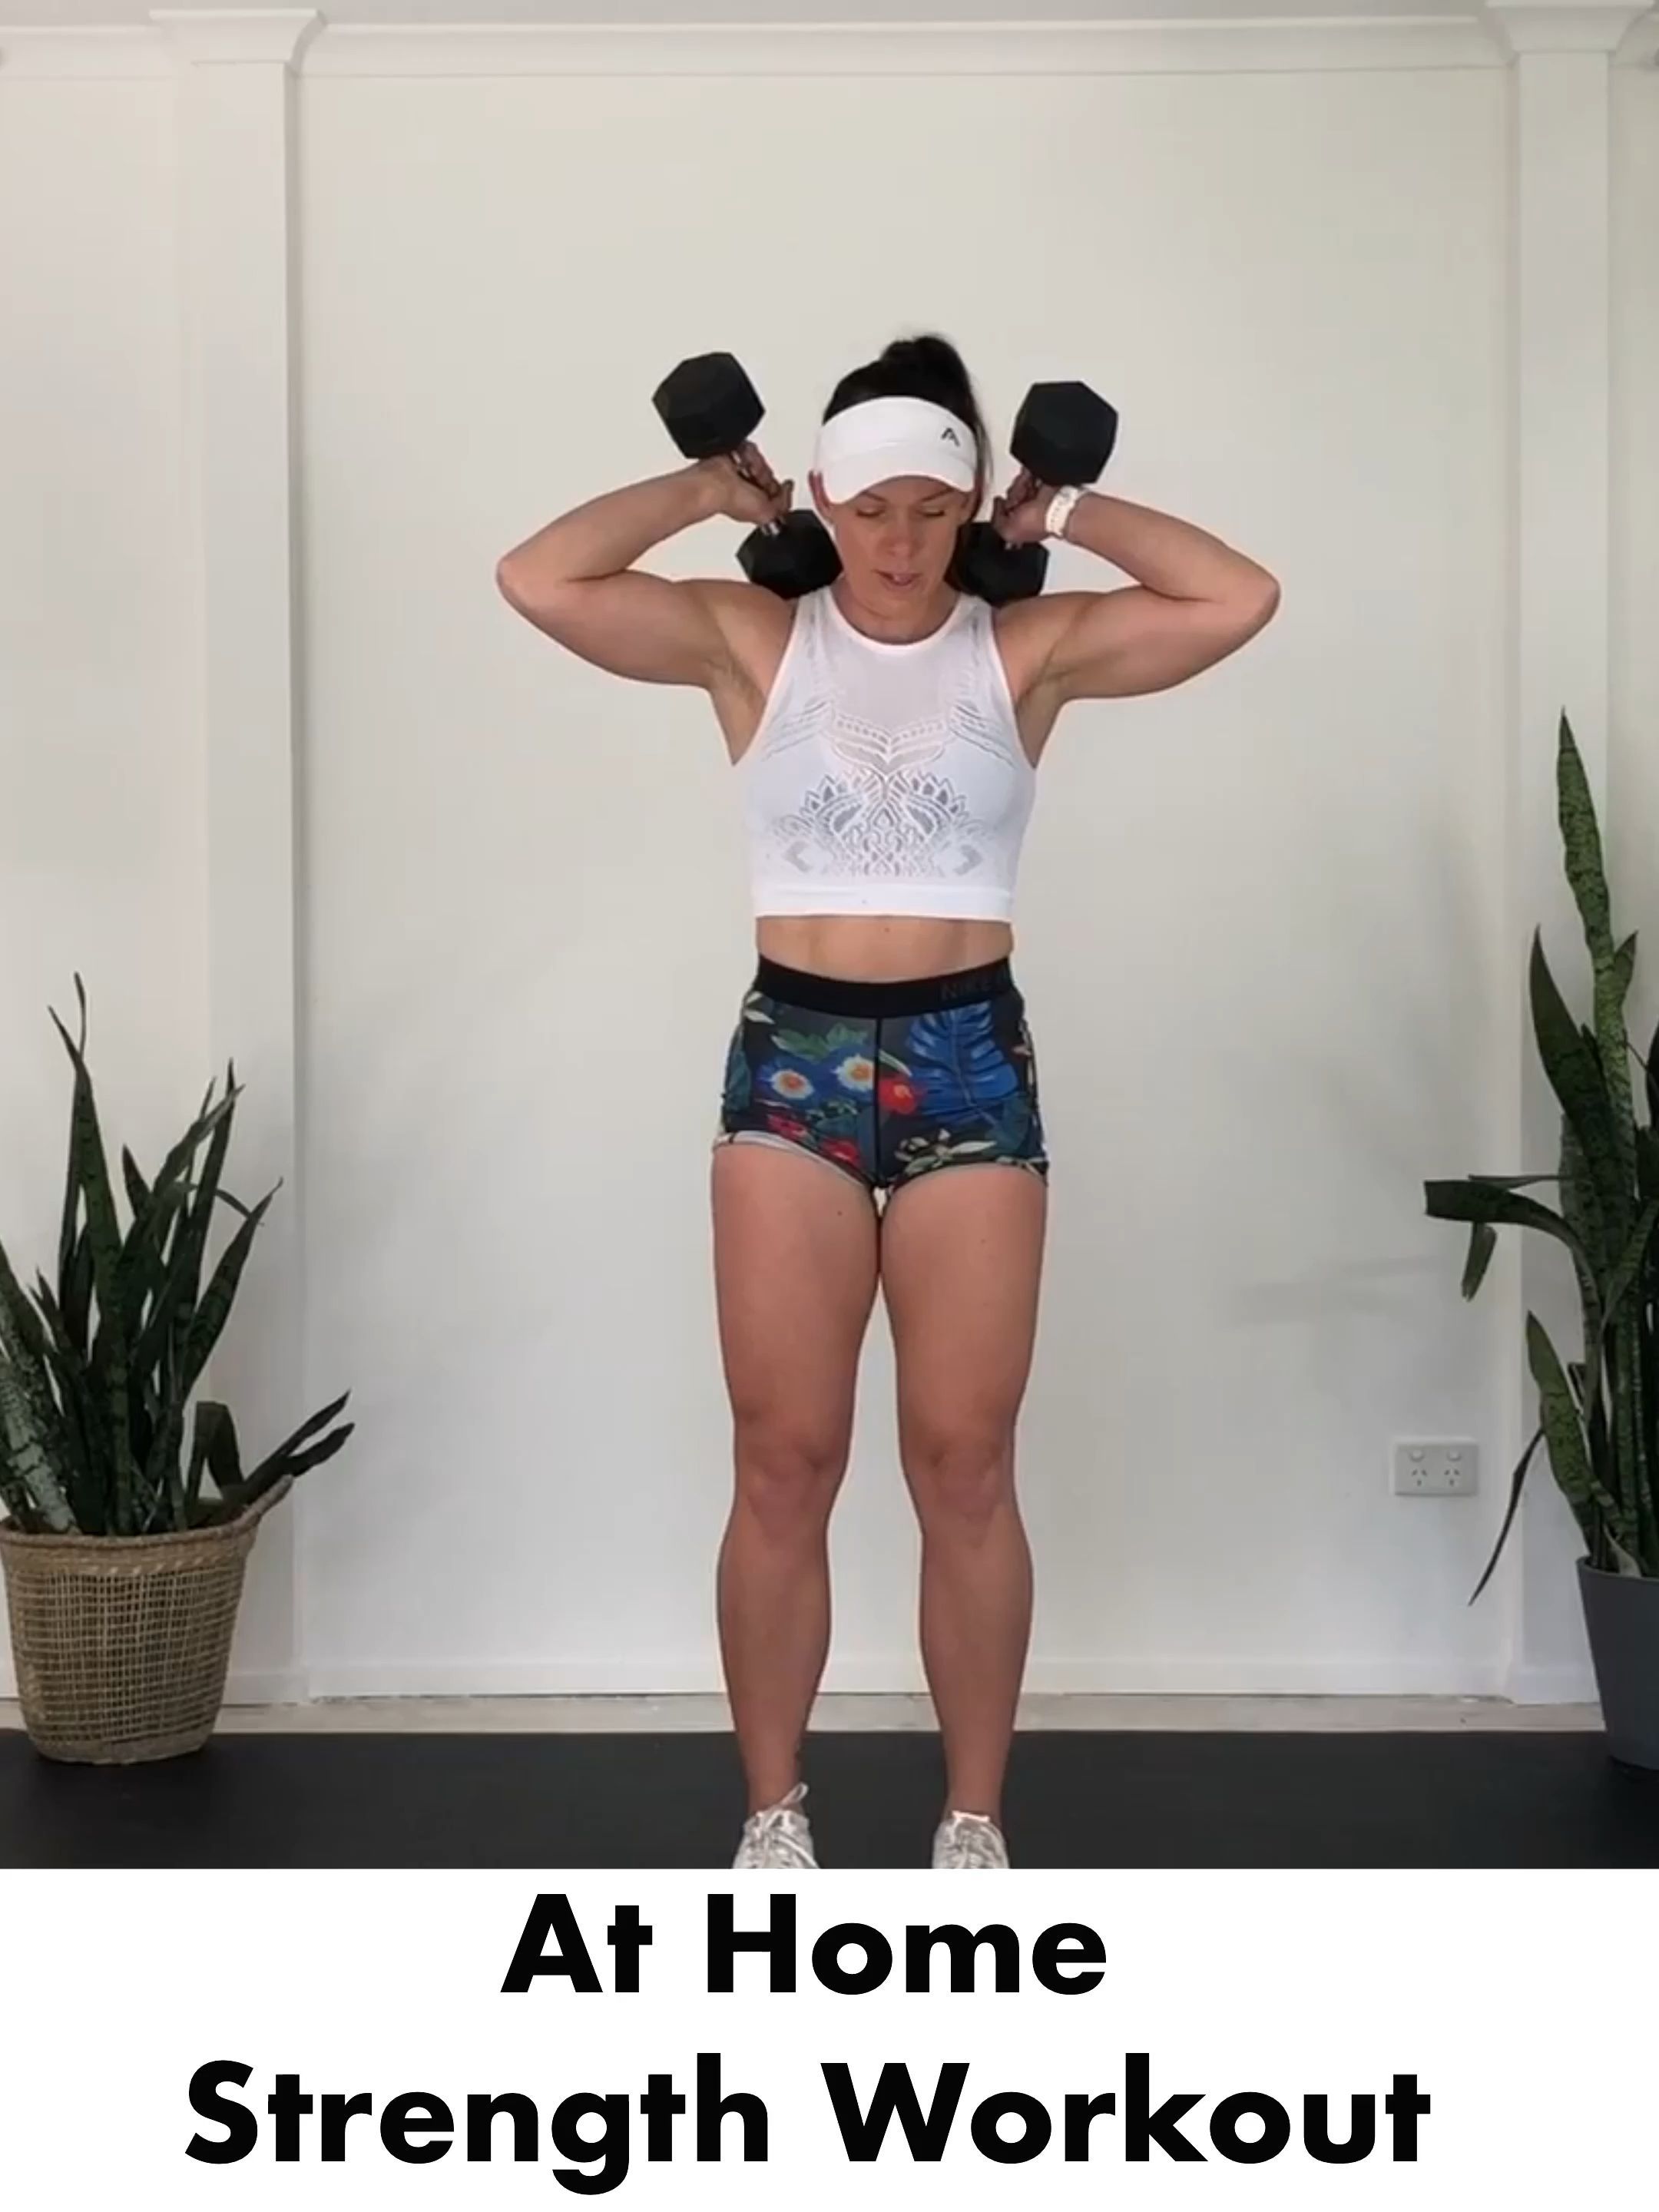 //рџ”ҐAT HOME STRENGTH WORKOUTрџ”Ґ// For Women -   23 fitness At Home videos ideas